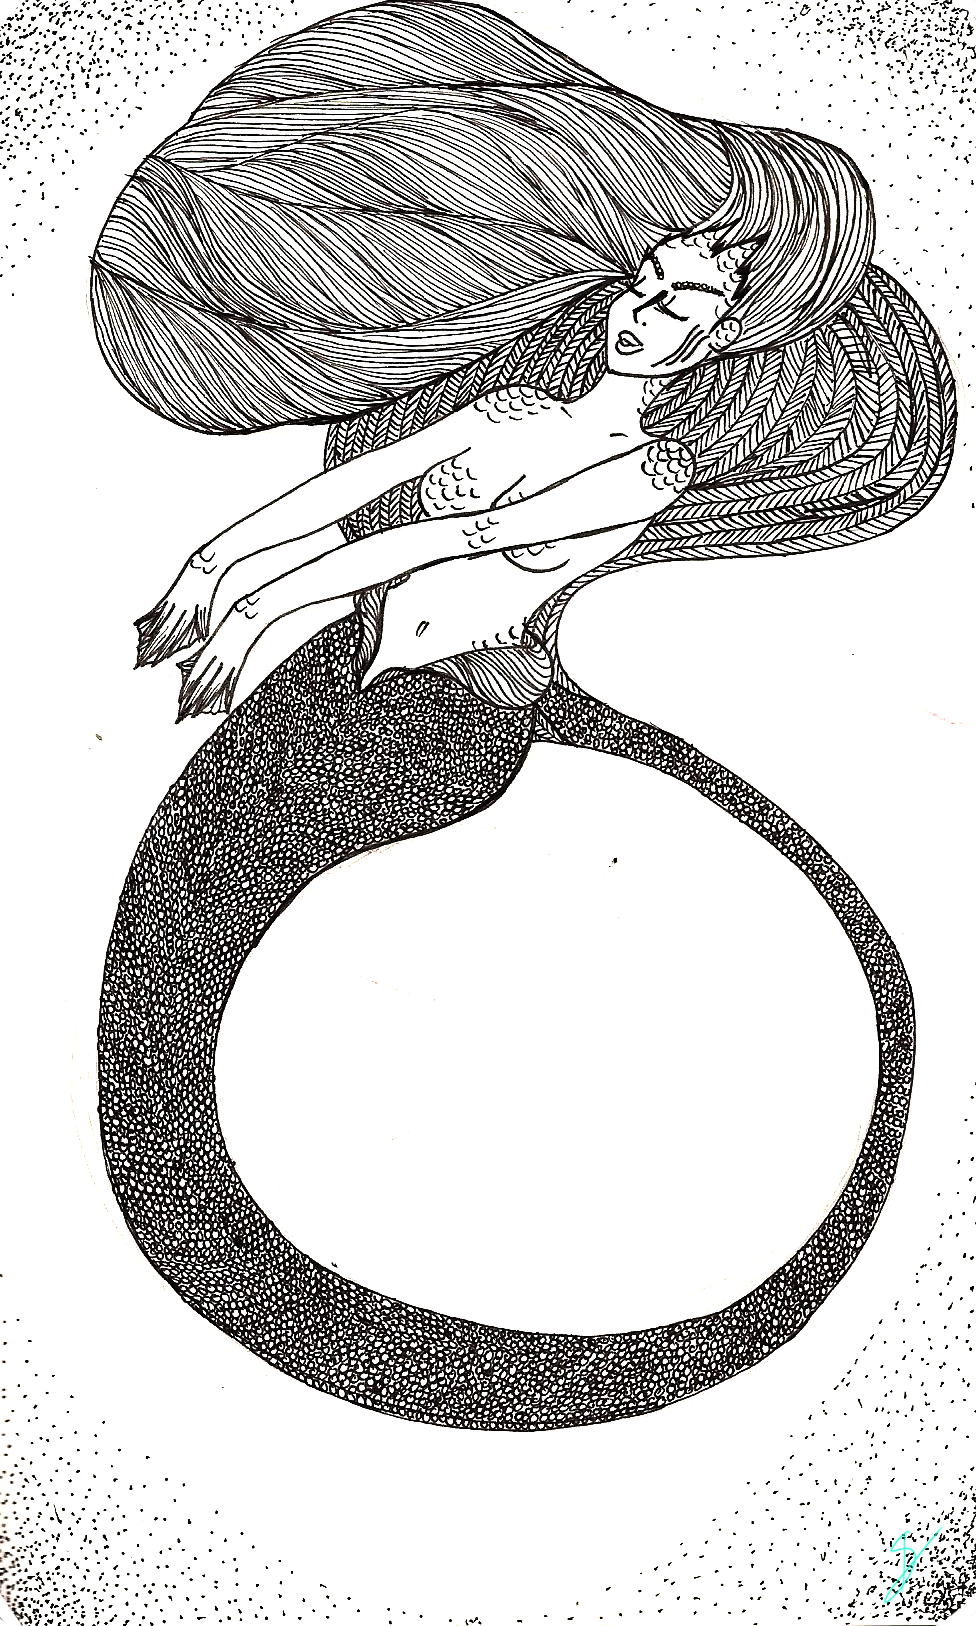 This week’s drawing. When I don’t know what to draw, I draw mermaids…. I think I might just be too lazy to draw legs ;)